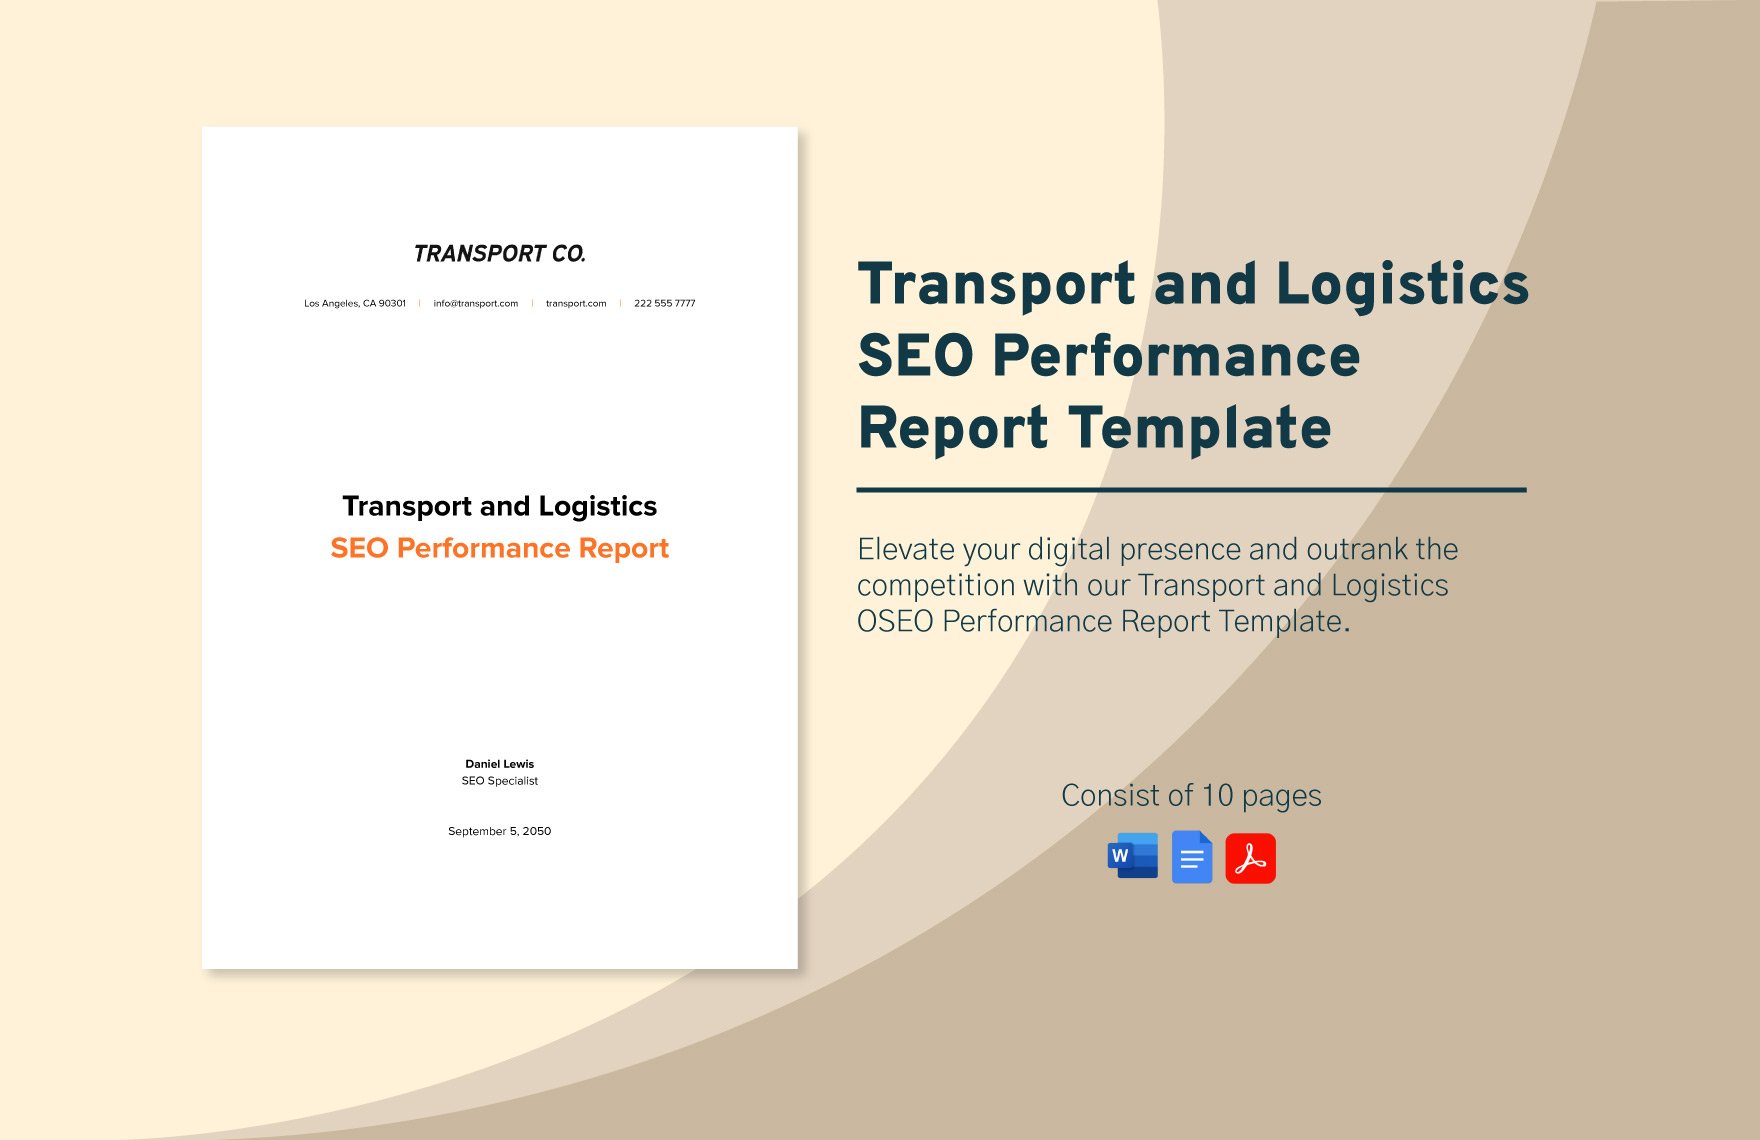 Transport and Logistics SEO Performance Report Template